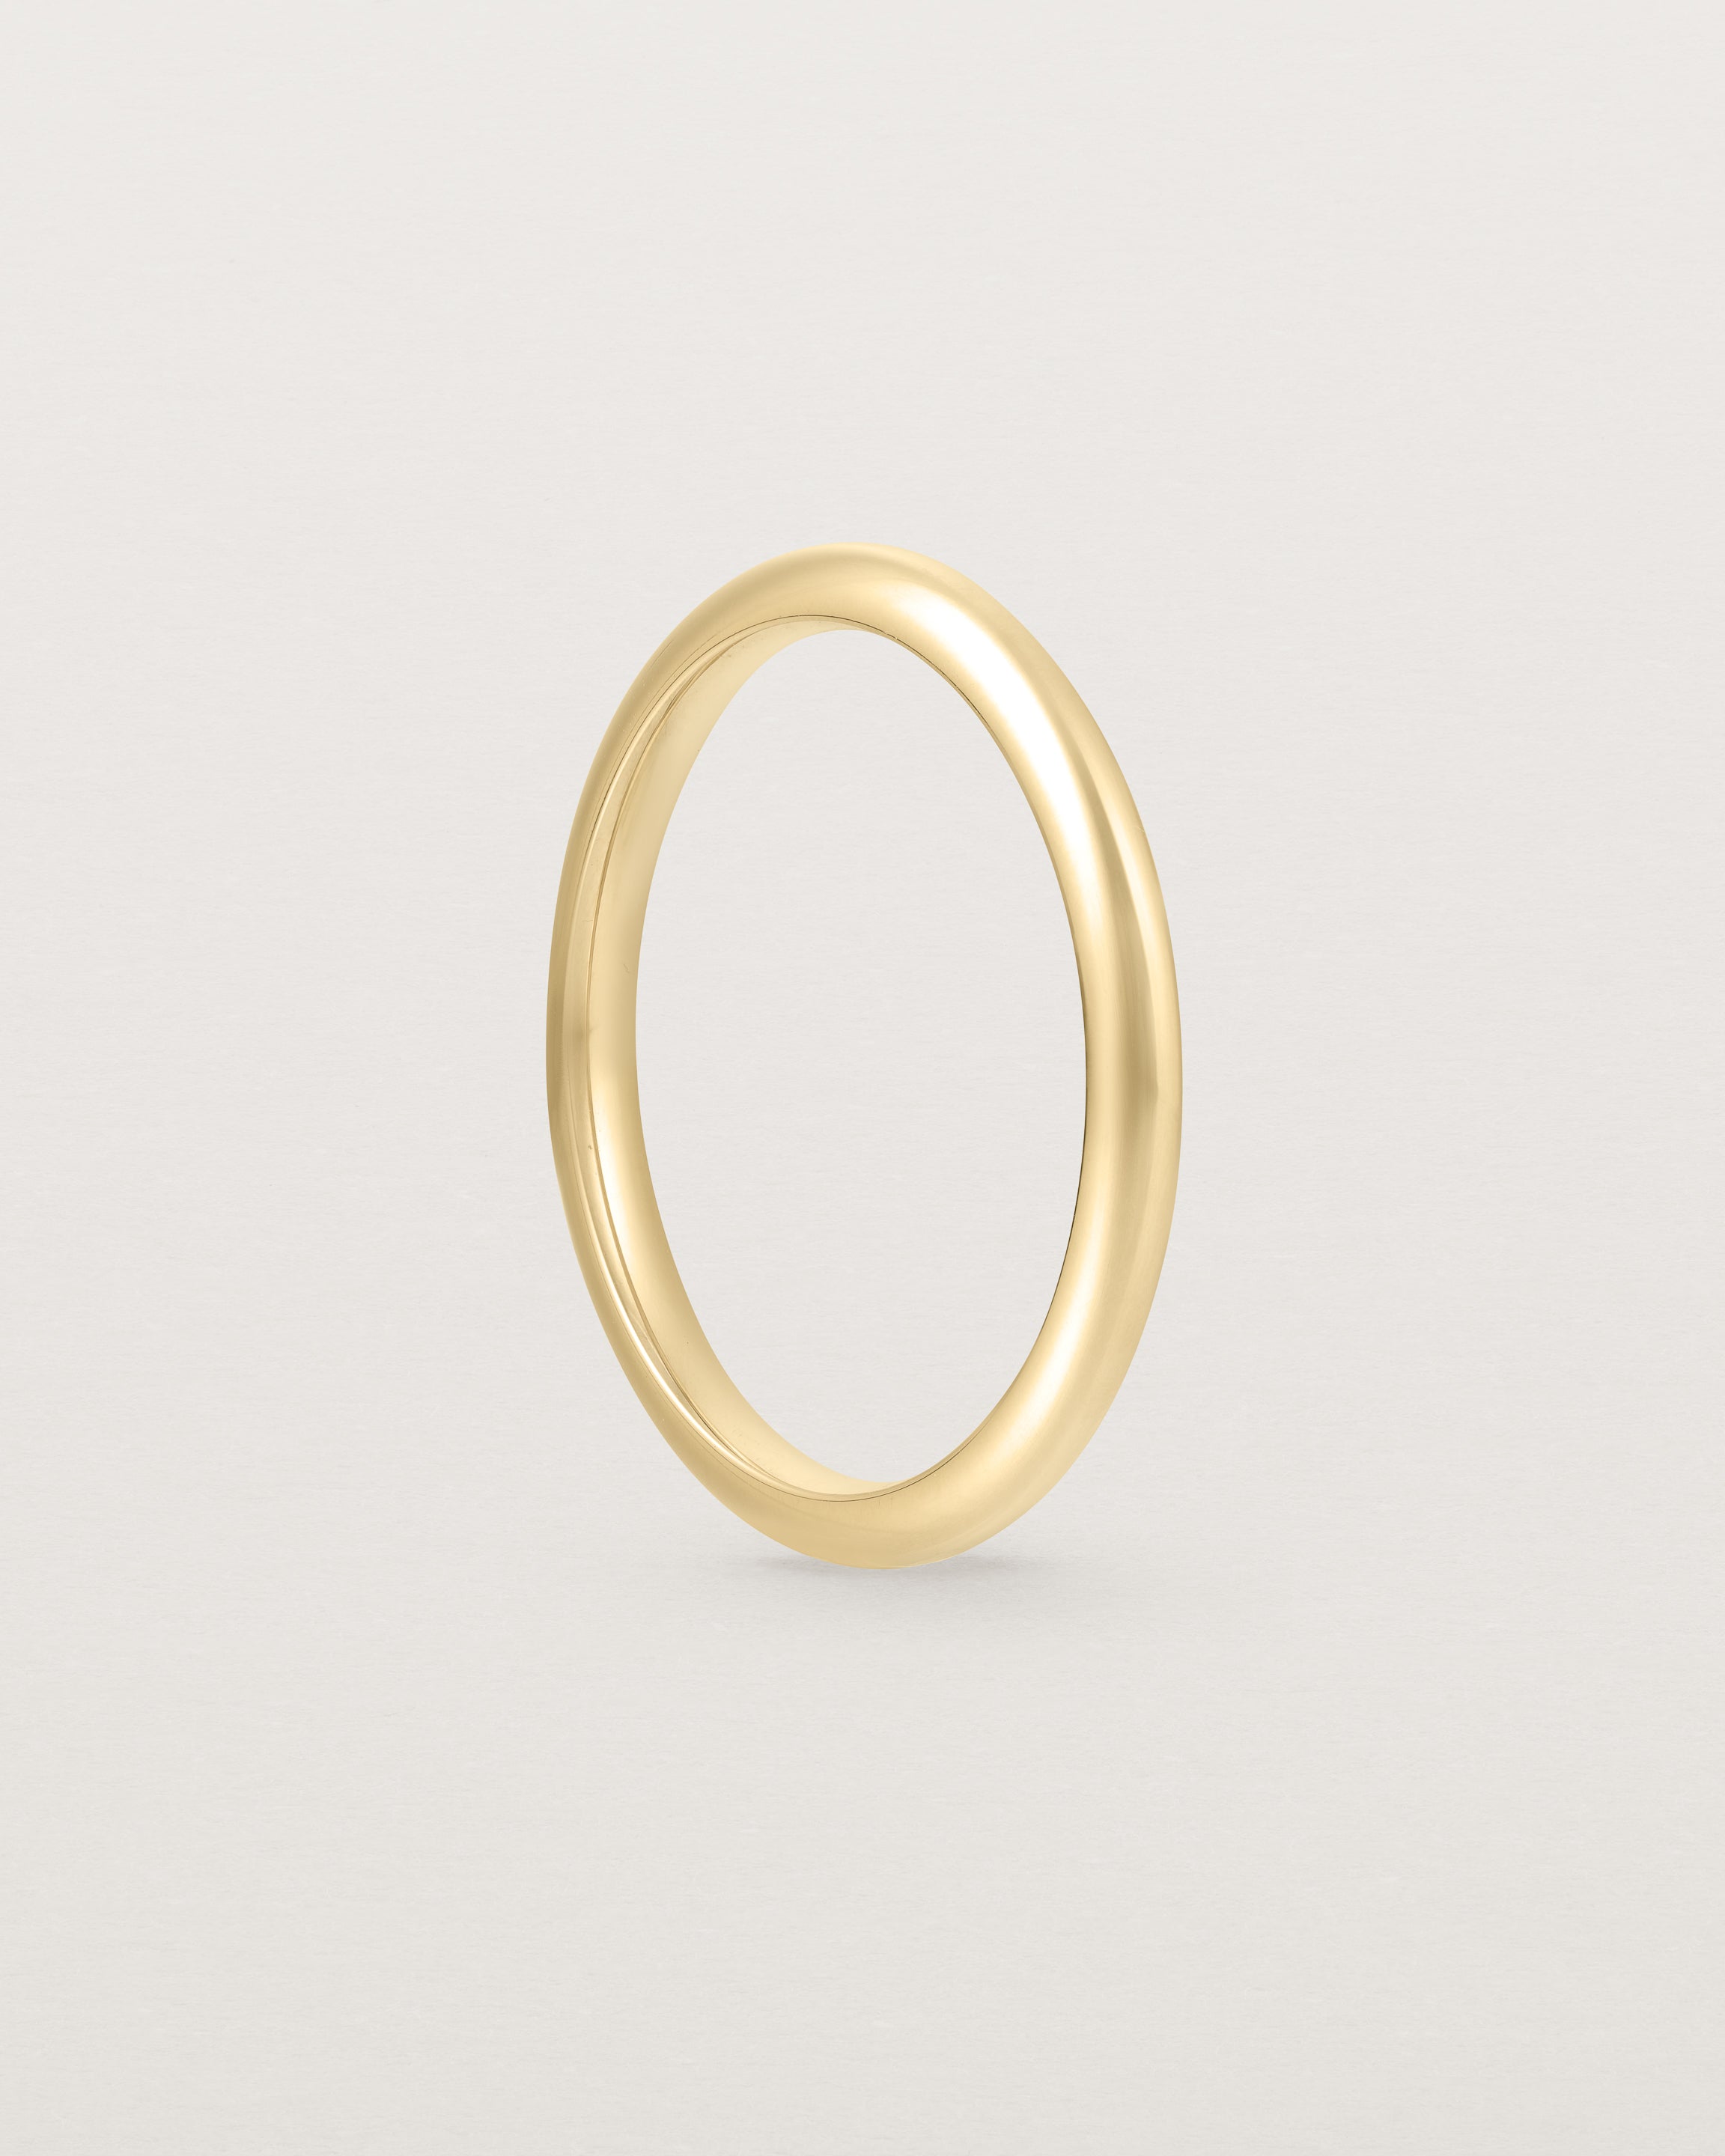 Standing view of the Bold Curve Ring | 2mm | Yellow Gold.